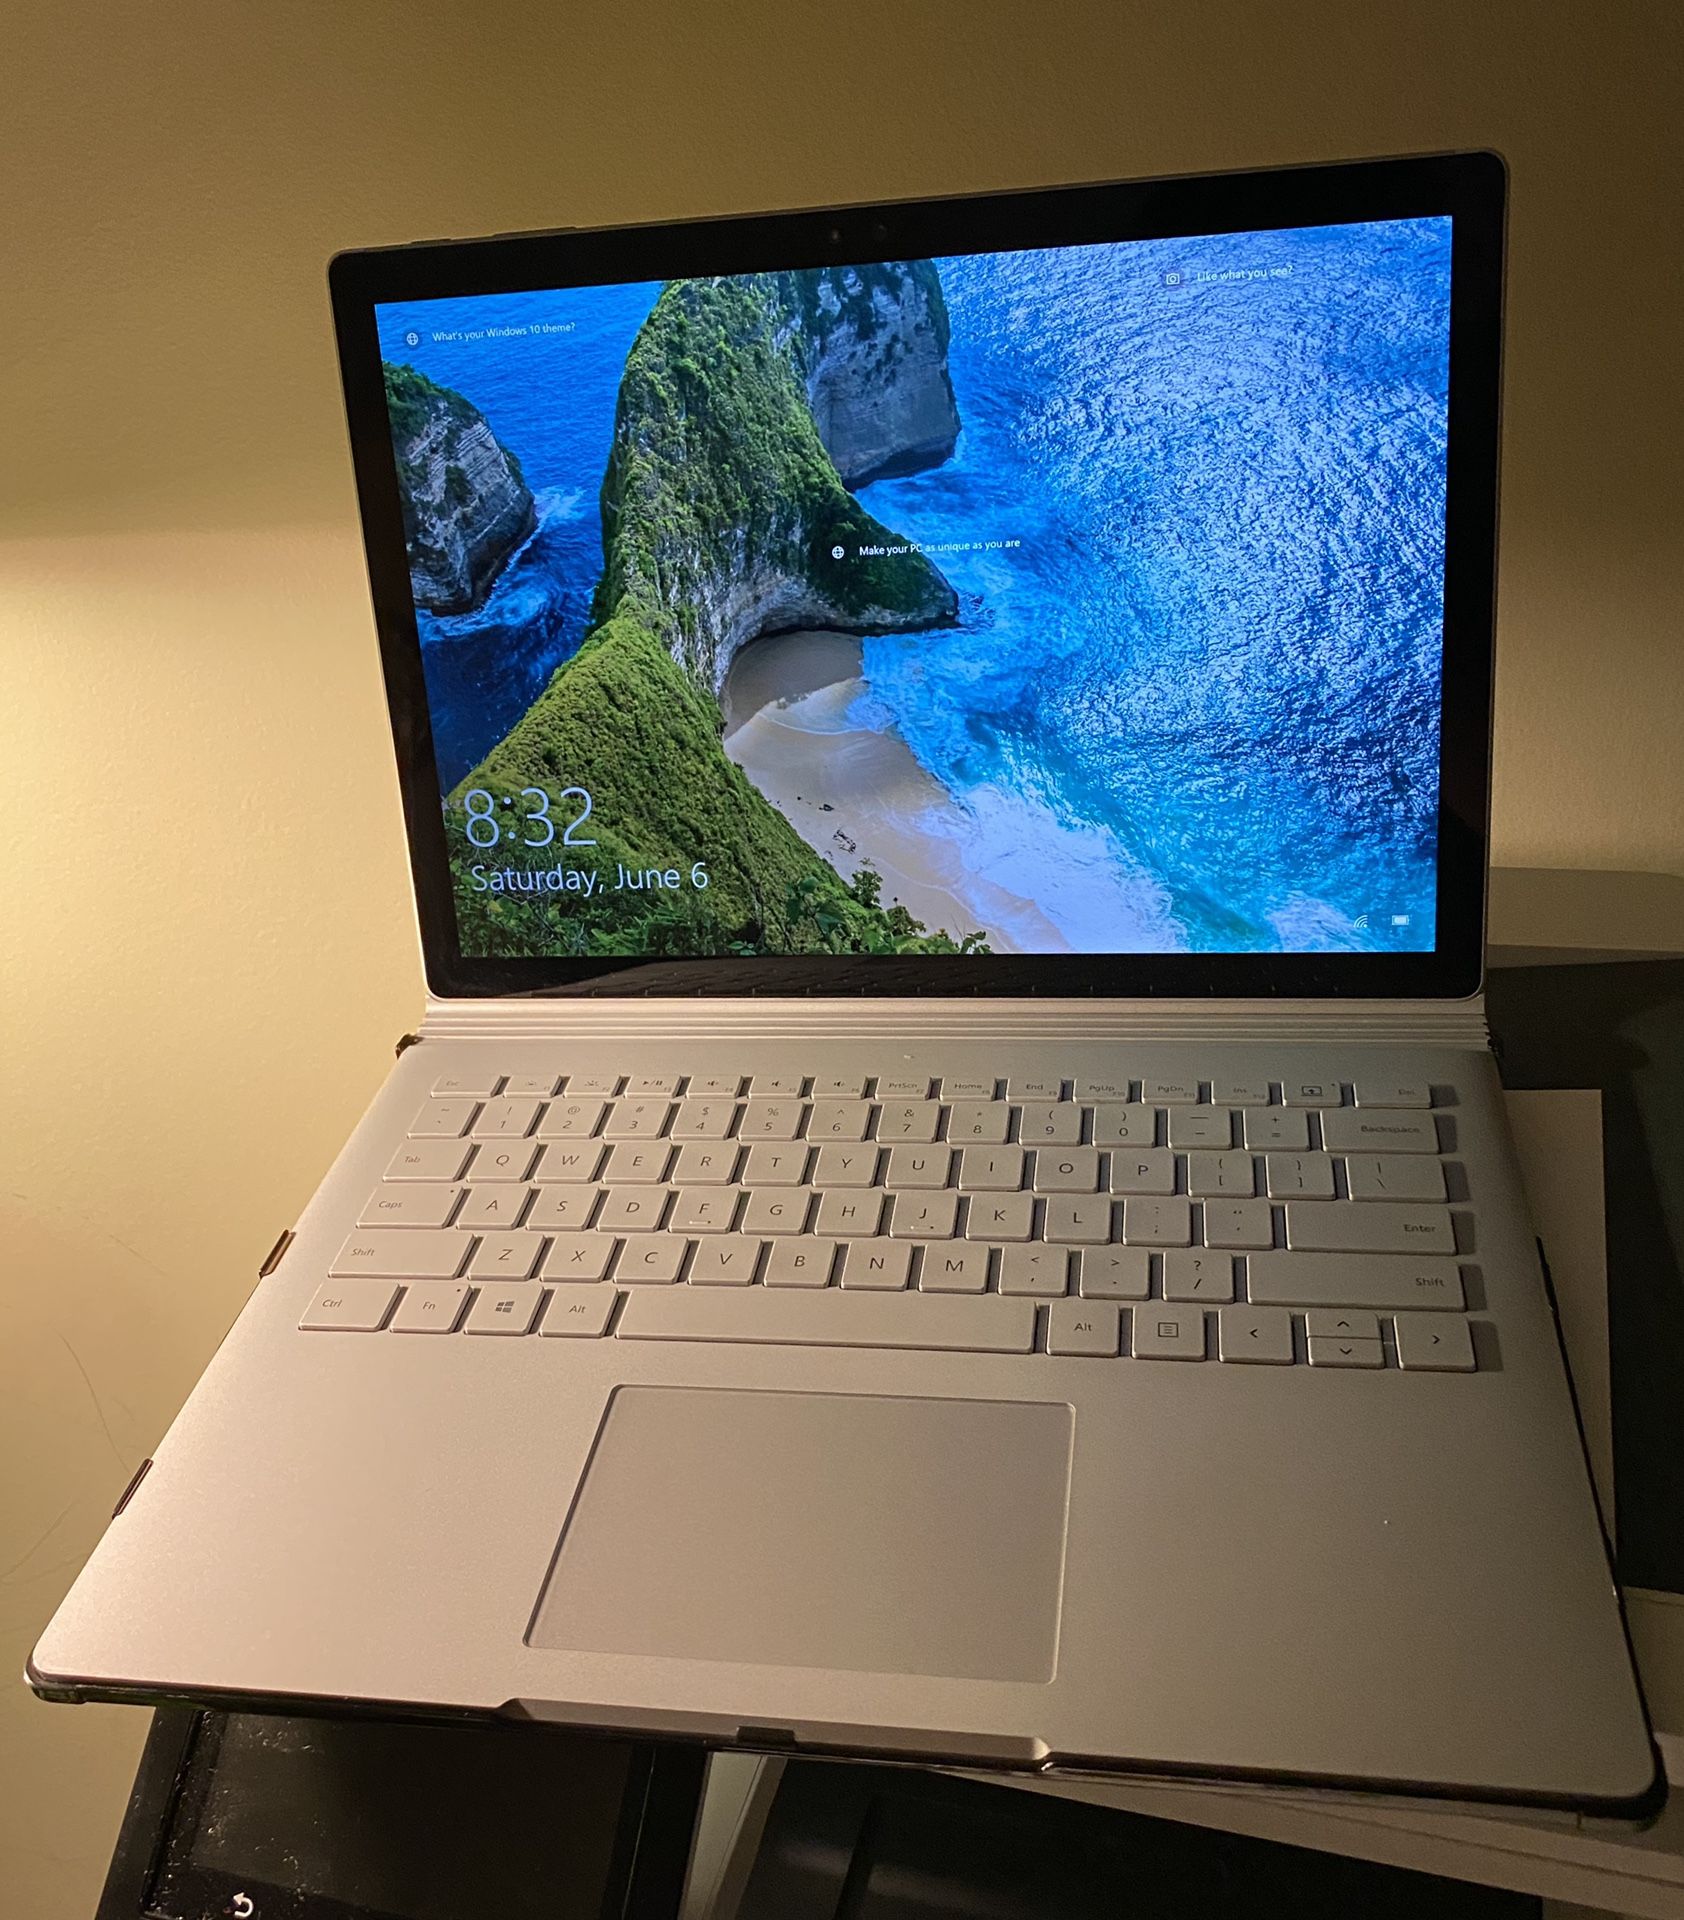 Surface Book i7 processor and 256 Gb 8 ram